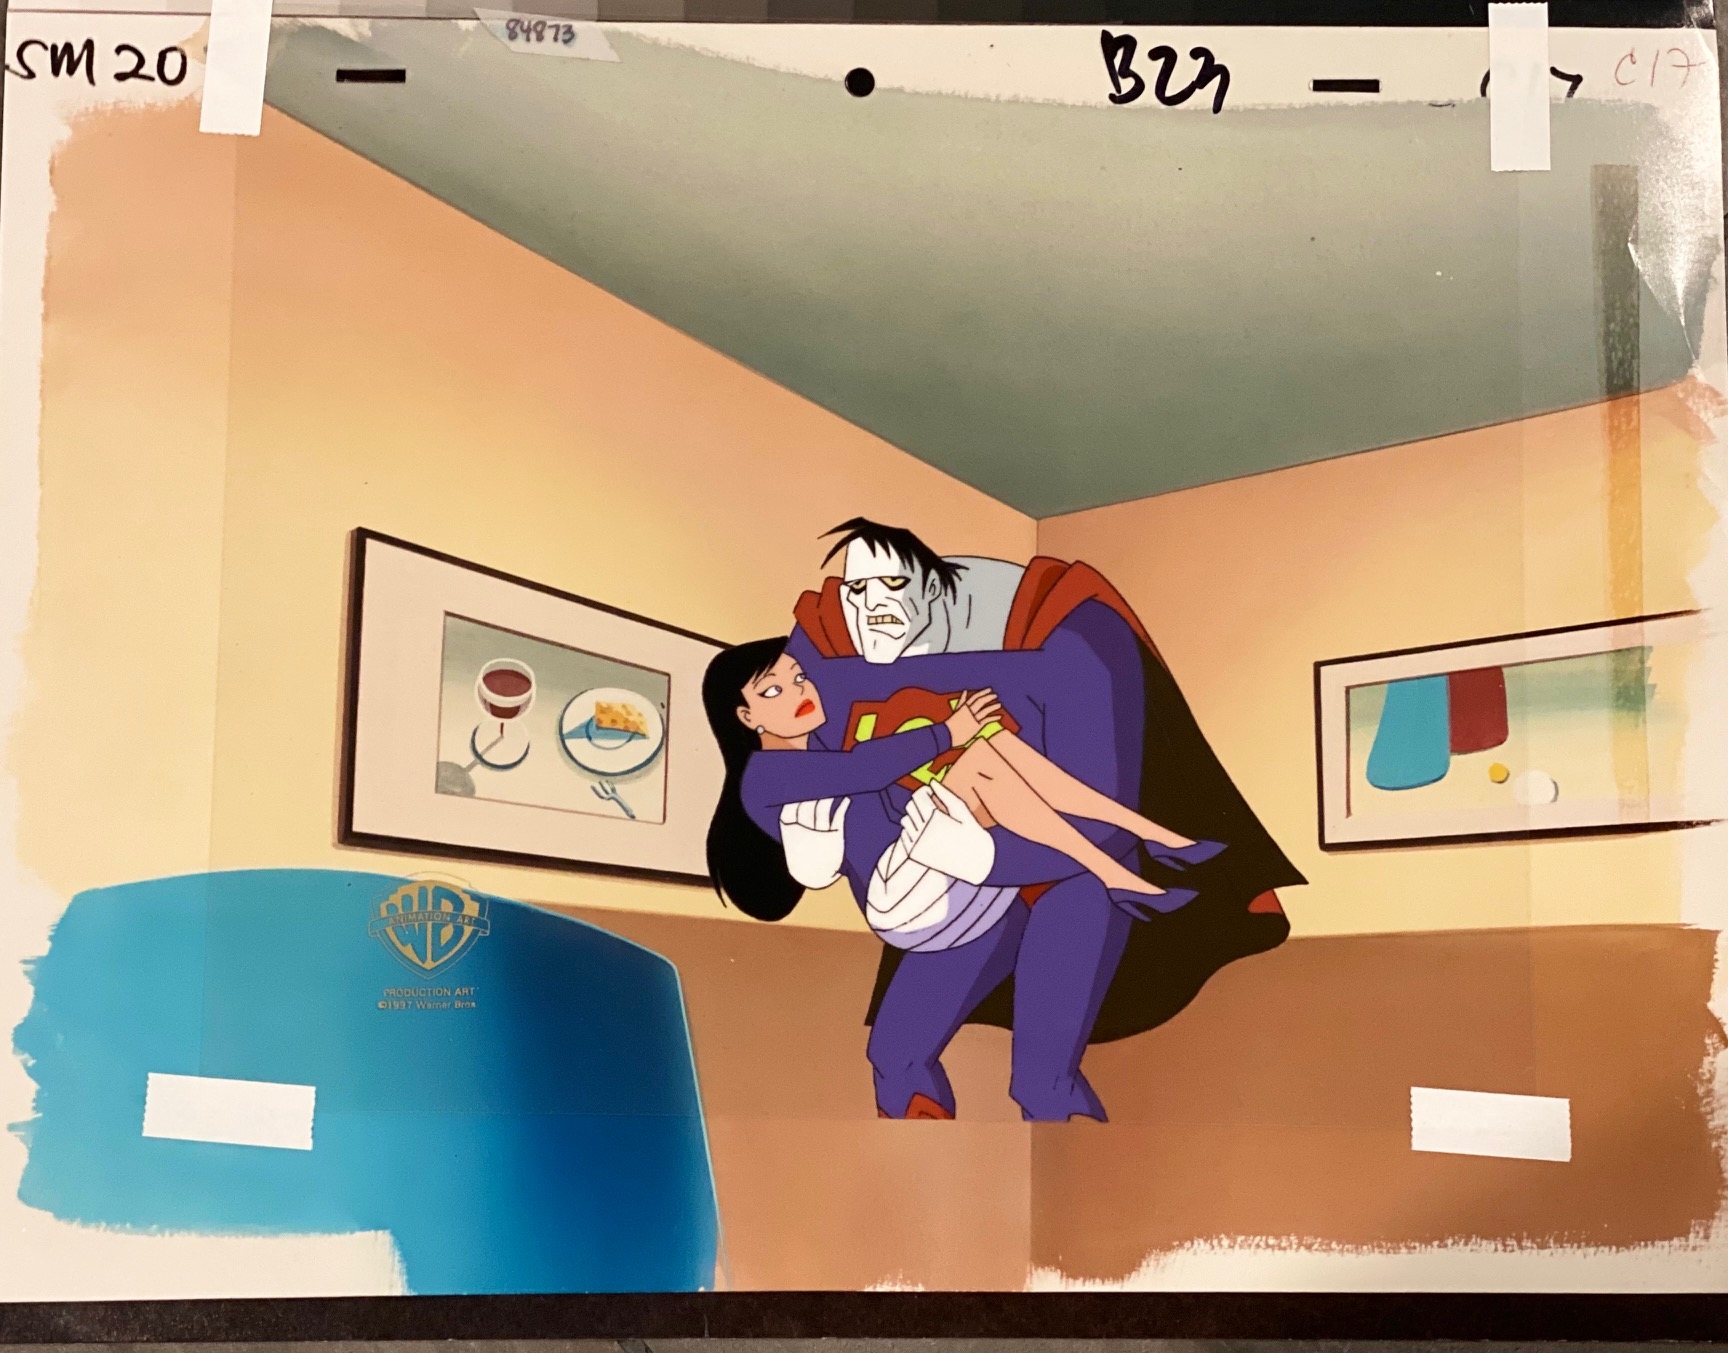 Superman: The Animated Series Production Cel, Identity Crisis , in Michael  “Chad” Cloe's Superman: The Animated Series (STAS) Animation Art Comic Art  Gallery Room